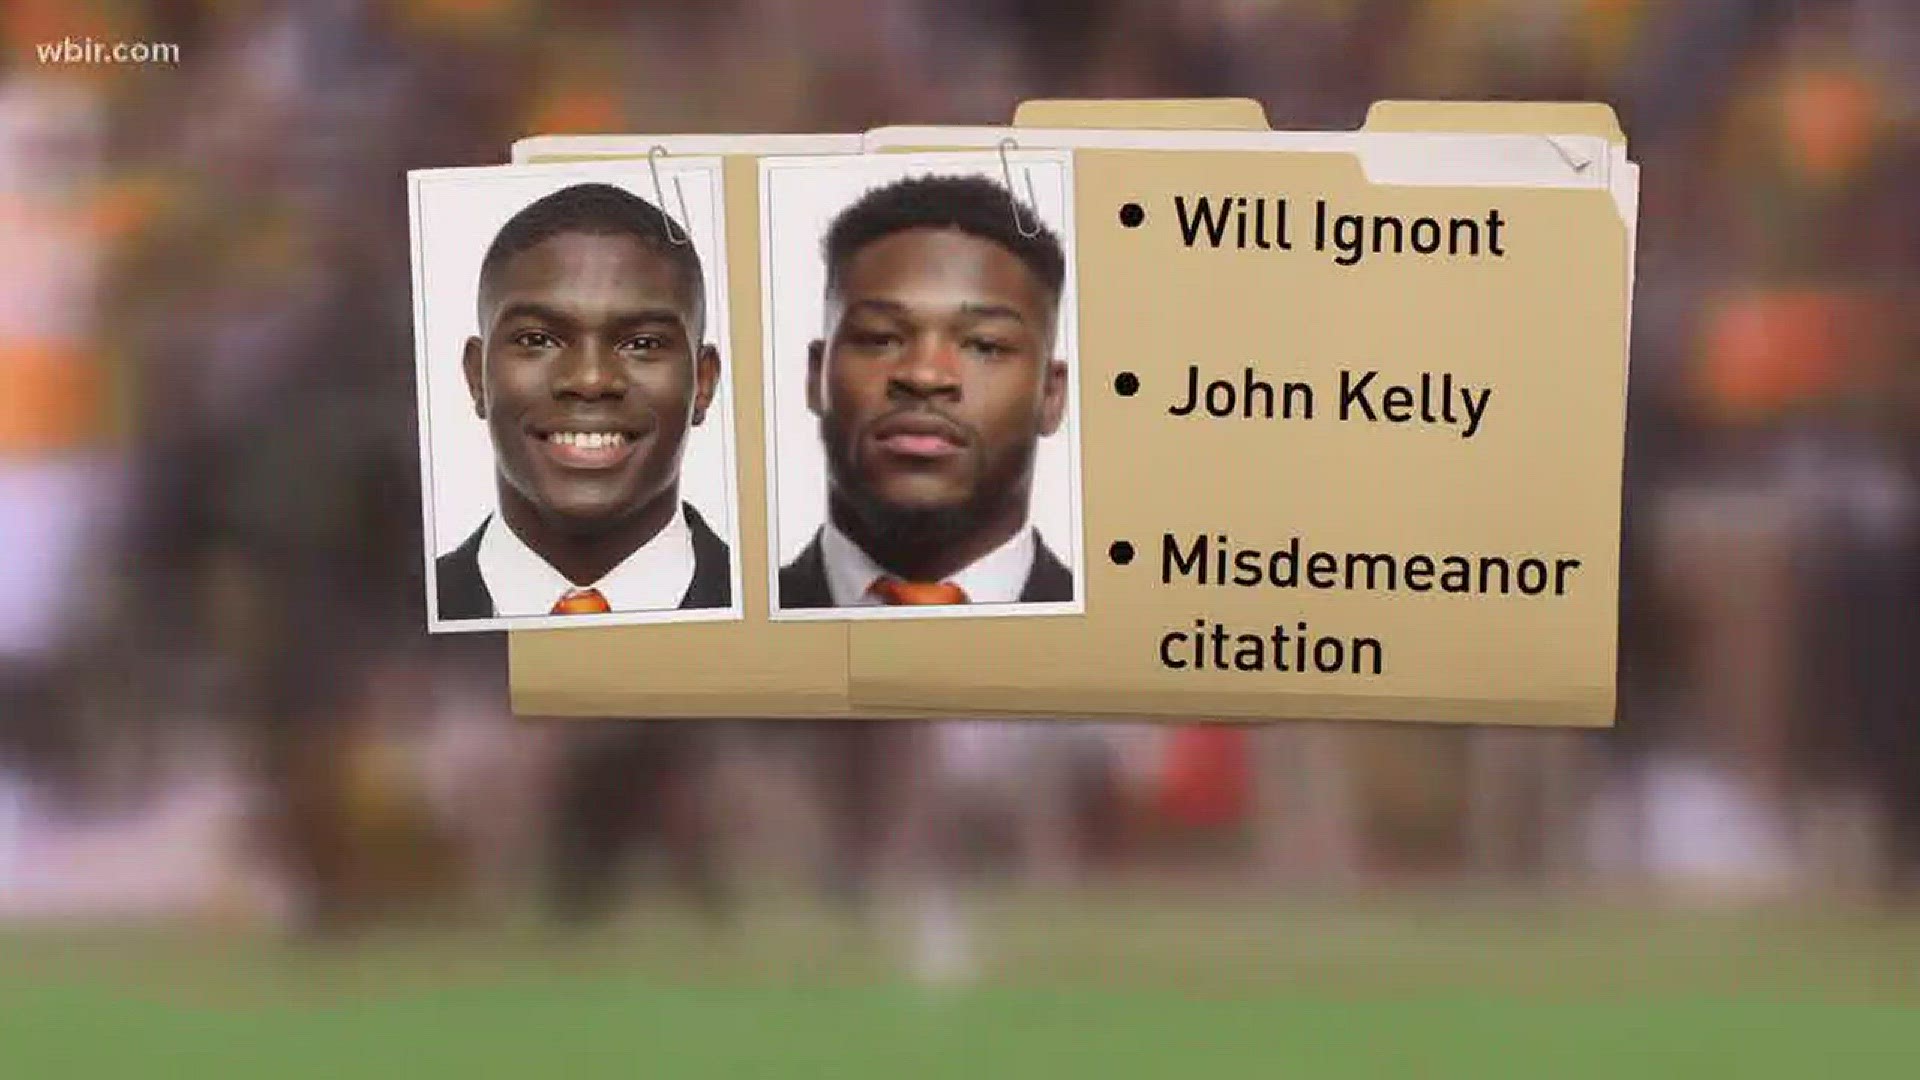 Oct. 25, 2017: Vols John Kelly and Will Ignont are suspended for the Kentucky game after they received misdemeanor marijuana citations.